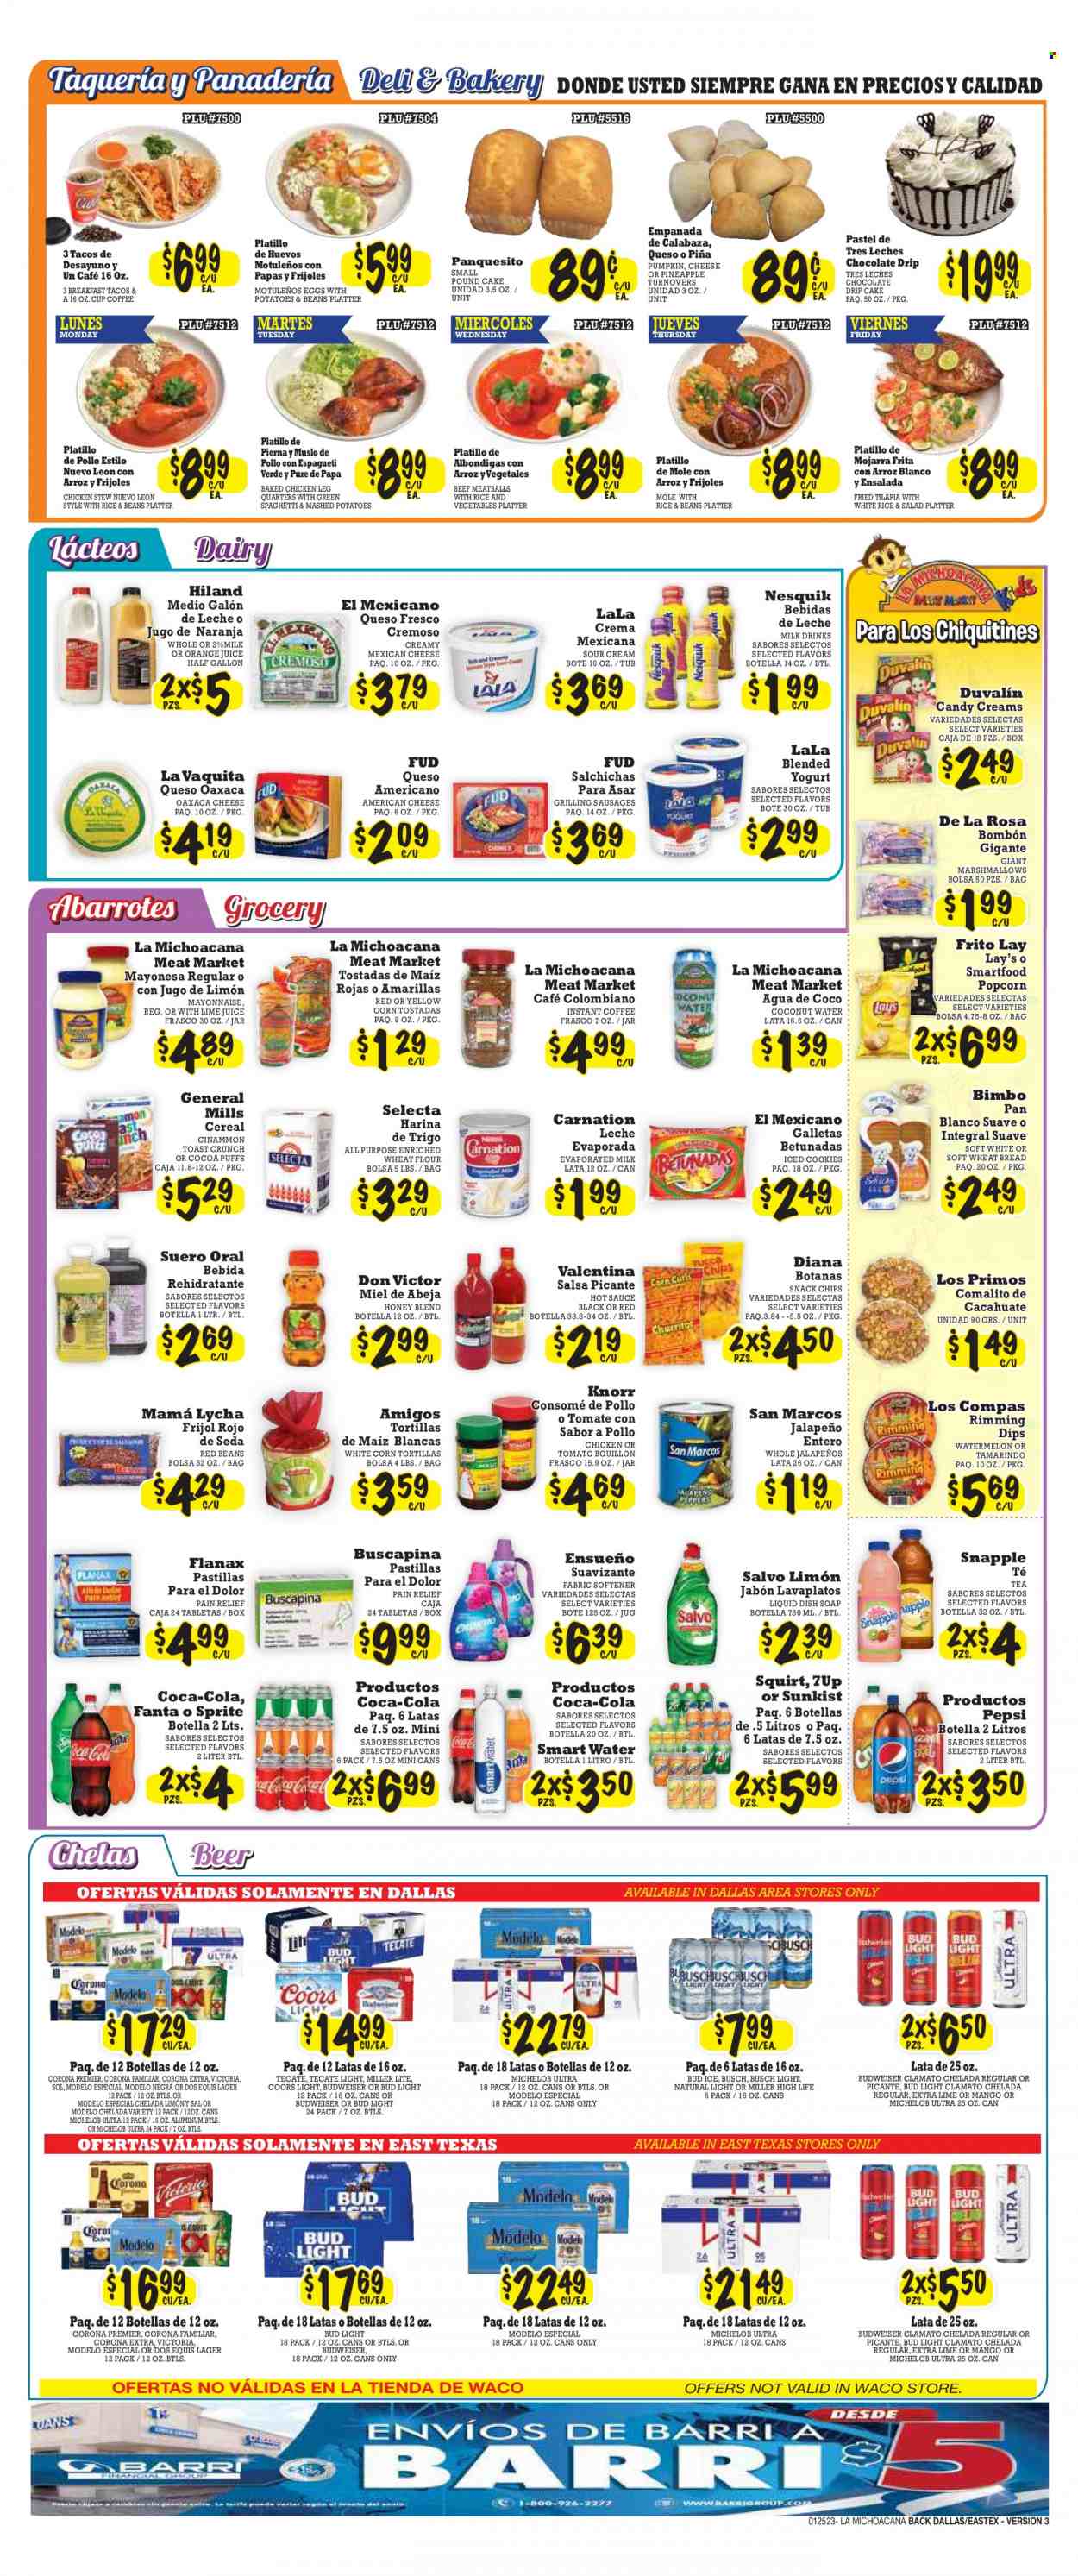 thumbnail - La Michoacana Meat Market Flyer - 01/25/2023 - 02/07/2023 - Sales products - bread, corn tortillas, tortillas, wheat bread, tostadas, tacos, turnovers, puffs, pound cake, salad, peppers, jalapeño, tilapia, mashed potatoes, spaghetti, meatballs, pasta, Knorr, sauce, sausage, american cheese, queso fresco, yoghurt, Nesquik, evaporated milk, sour cream, mayonnaise, dip, cookies, marshmallows, Candy, General Mills, Lay’s, Smartfood, popcorn, corn tostadas, salty snack, bouillon, wheat flour, red beans, white rice, hot sauce, salsa, Coca-Cola, Sprite, Pepsi, orange juice, Fanta, fruit drink, Clamato, coconut water, soft drink, 7UP, Snapple, lime juice, Smartwater, carbonated soft drink, tea, coffee, instant coffee, beer, Budweiser, Busch, Bud Light, Corona Extra, Lager, Modelo, chicken legs, fabric softener, dishwashing liquid, Suave, pan, platters, jar, Miller Lite, Coors, Dos Equis, Michelob. Page 2.